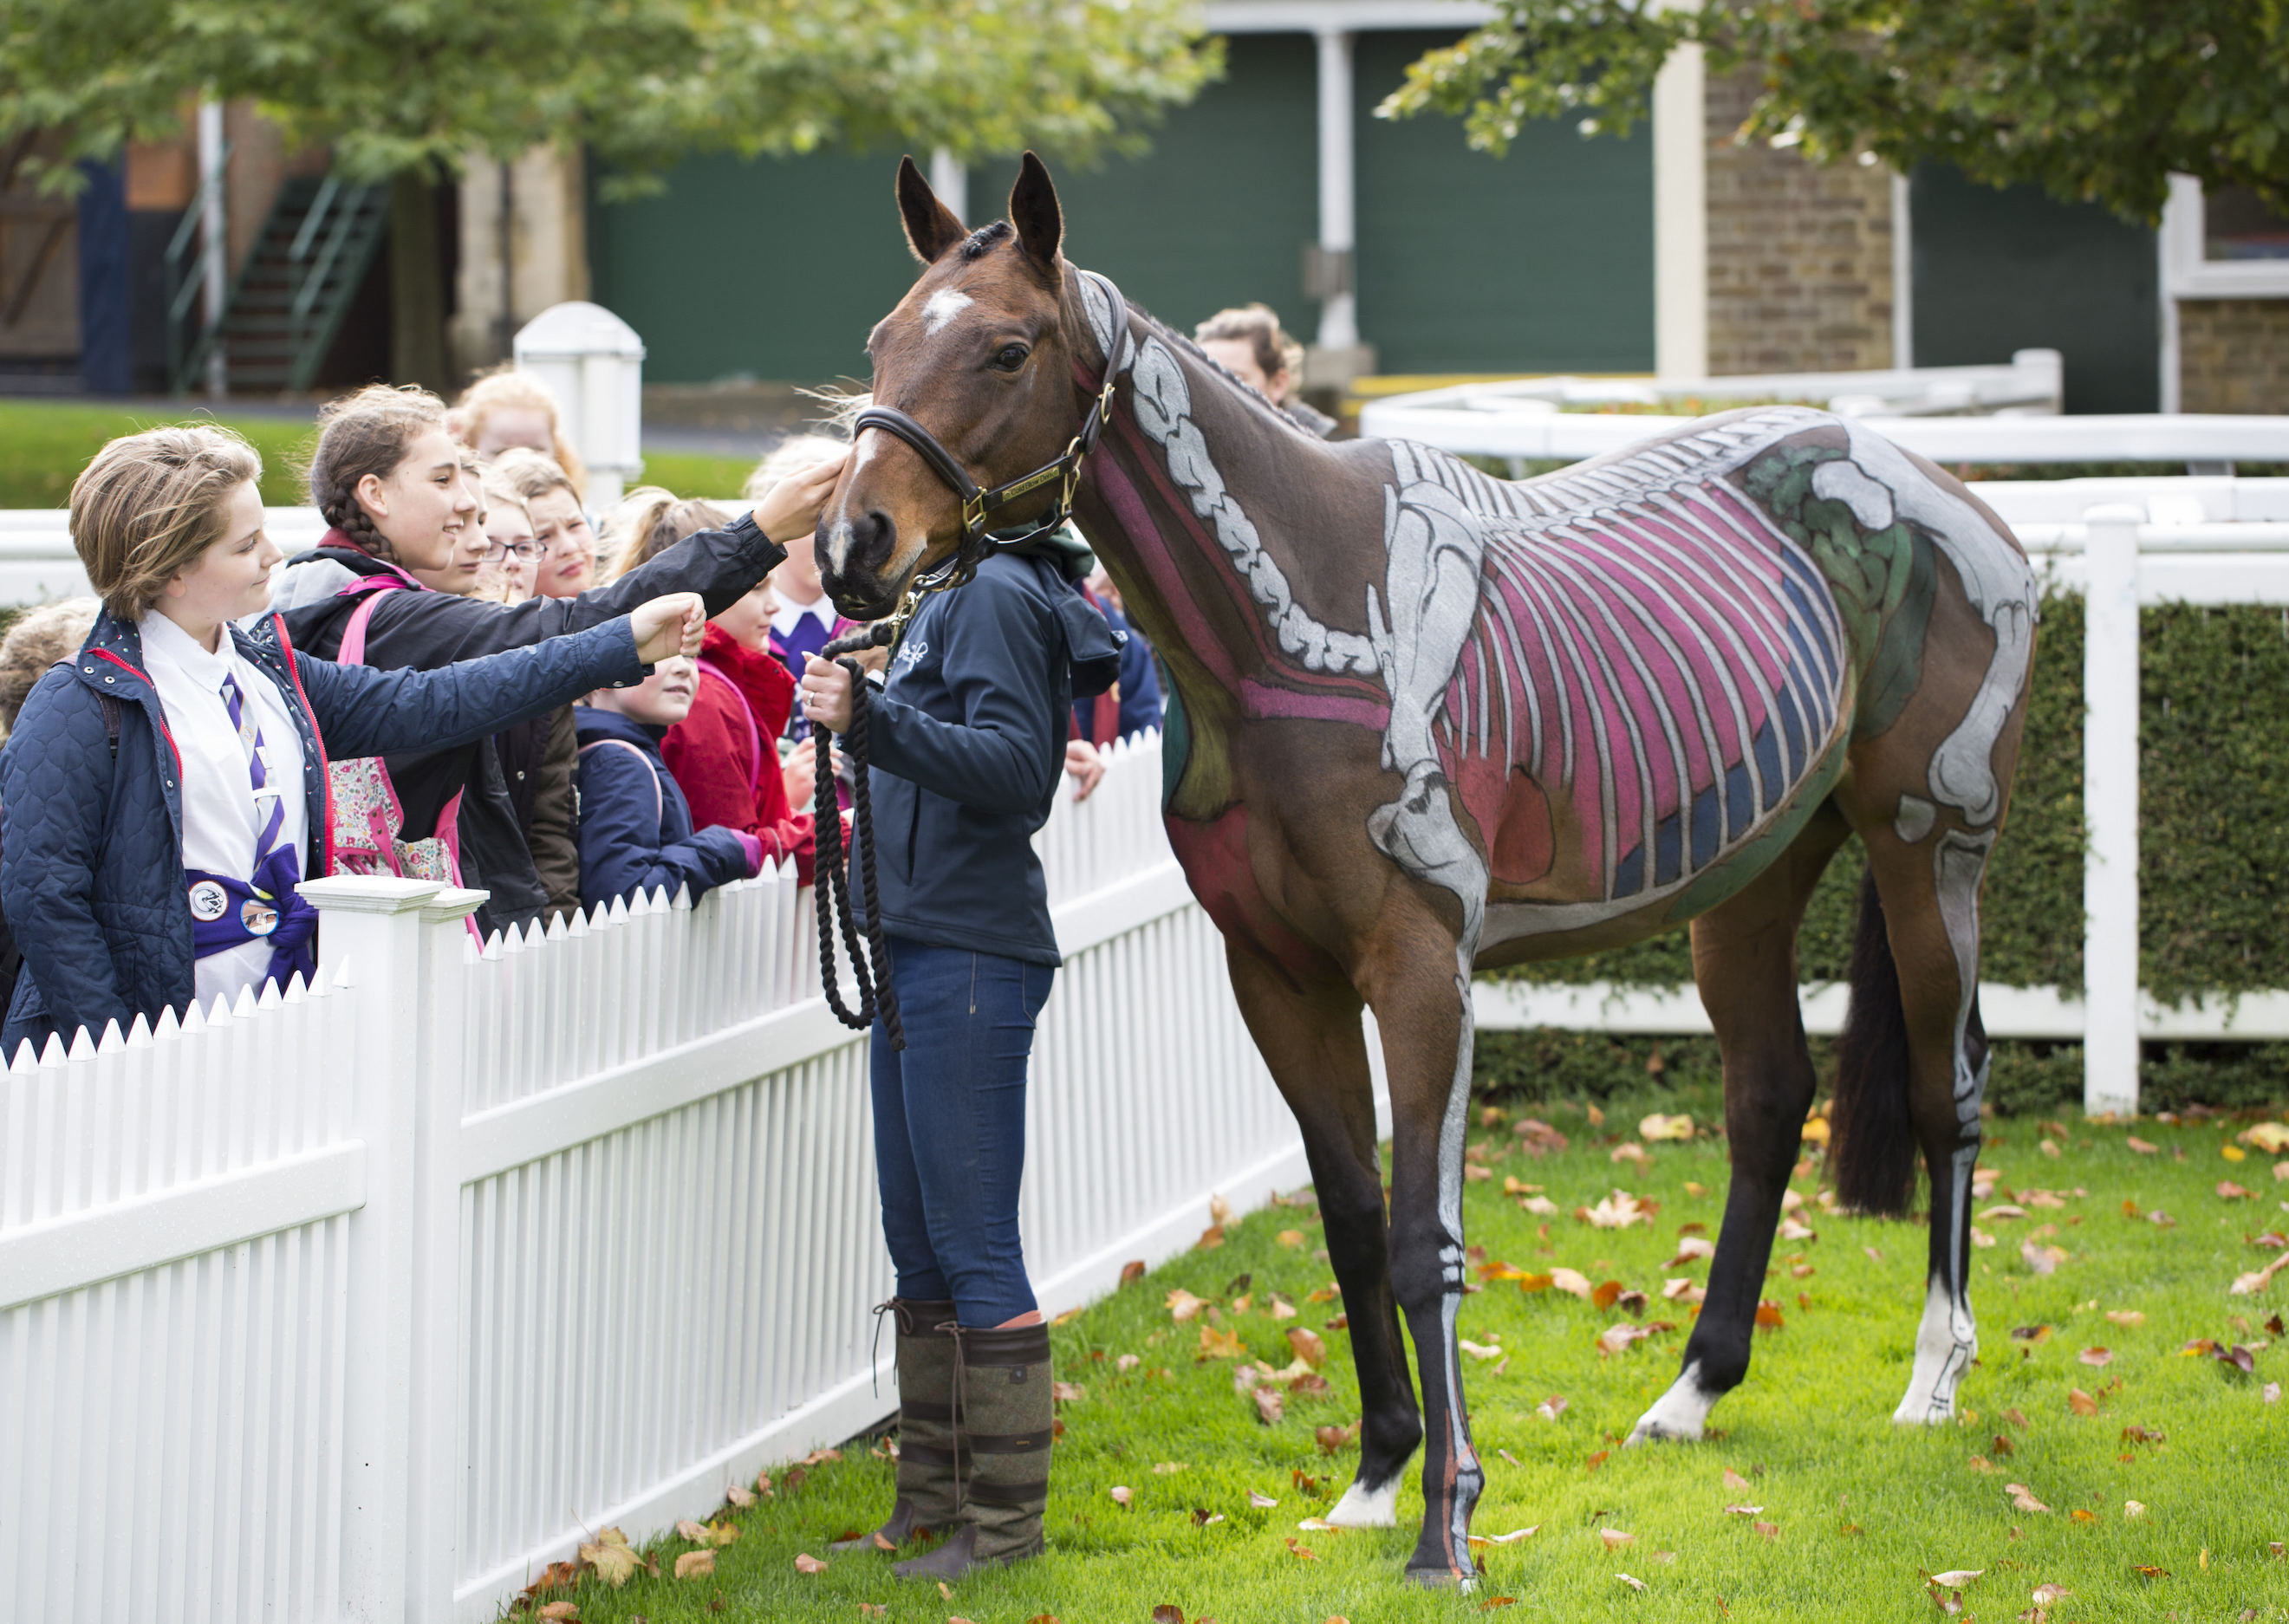 Big draw: youngsters get a chance to meeting Thoroughbreds - and learn about them - on Qipco British Champions Day